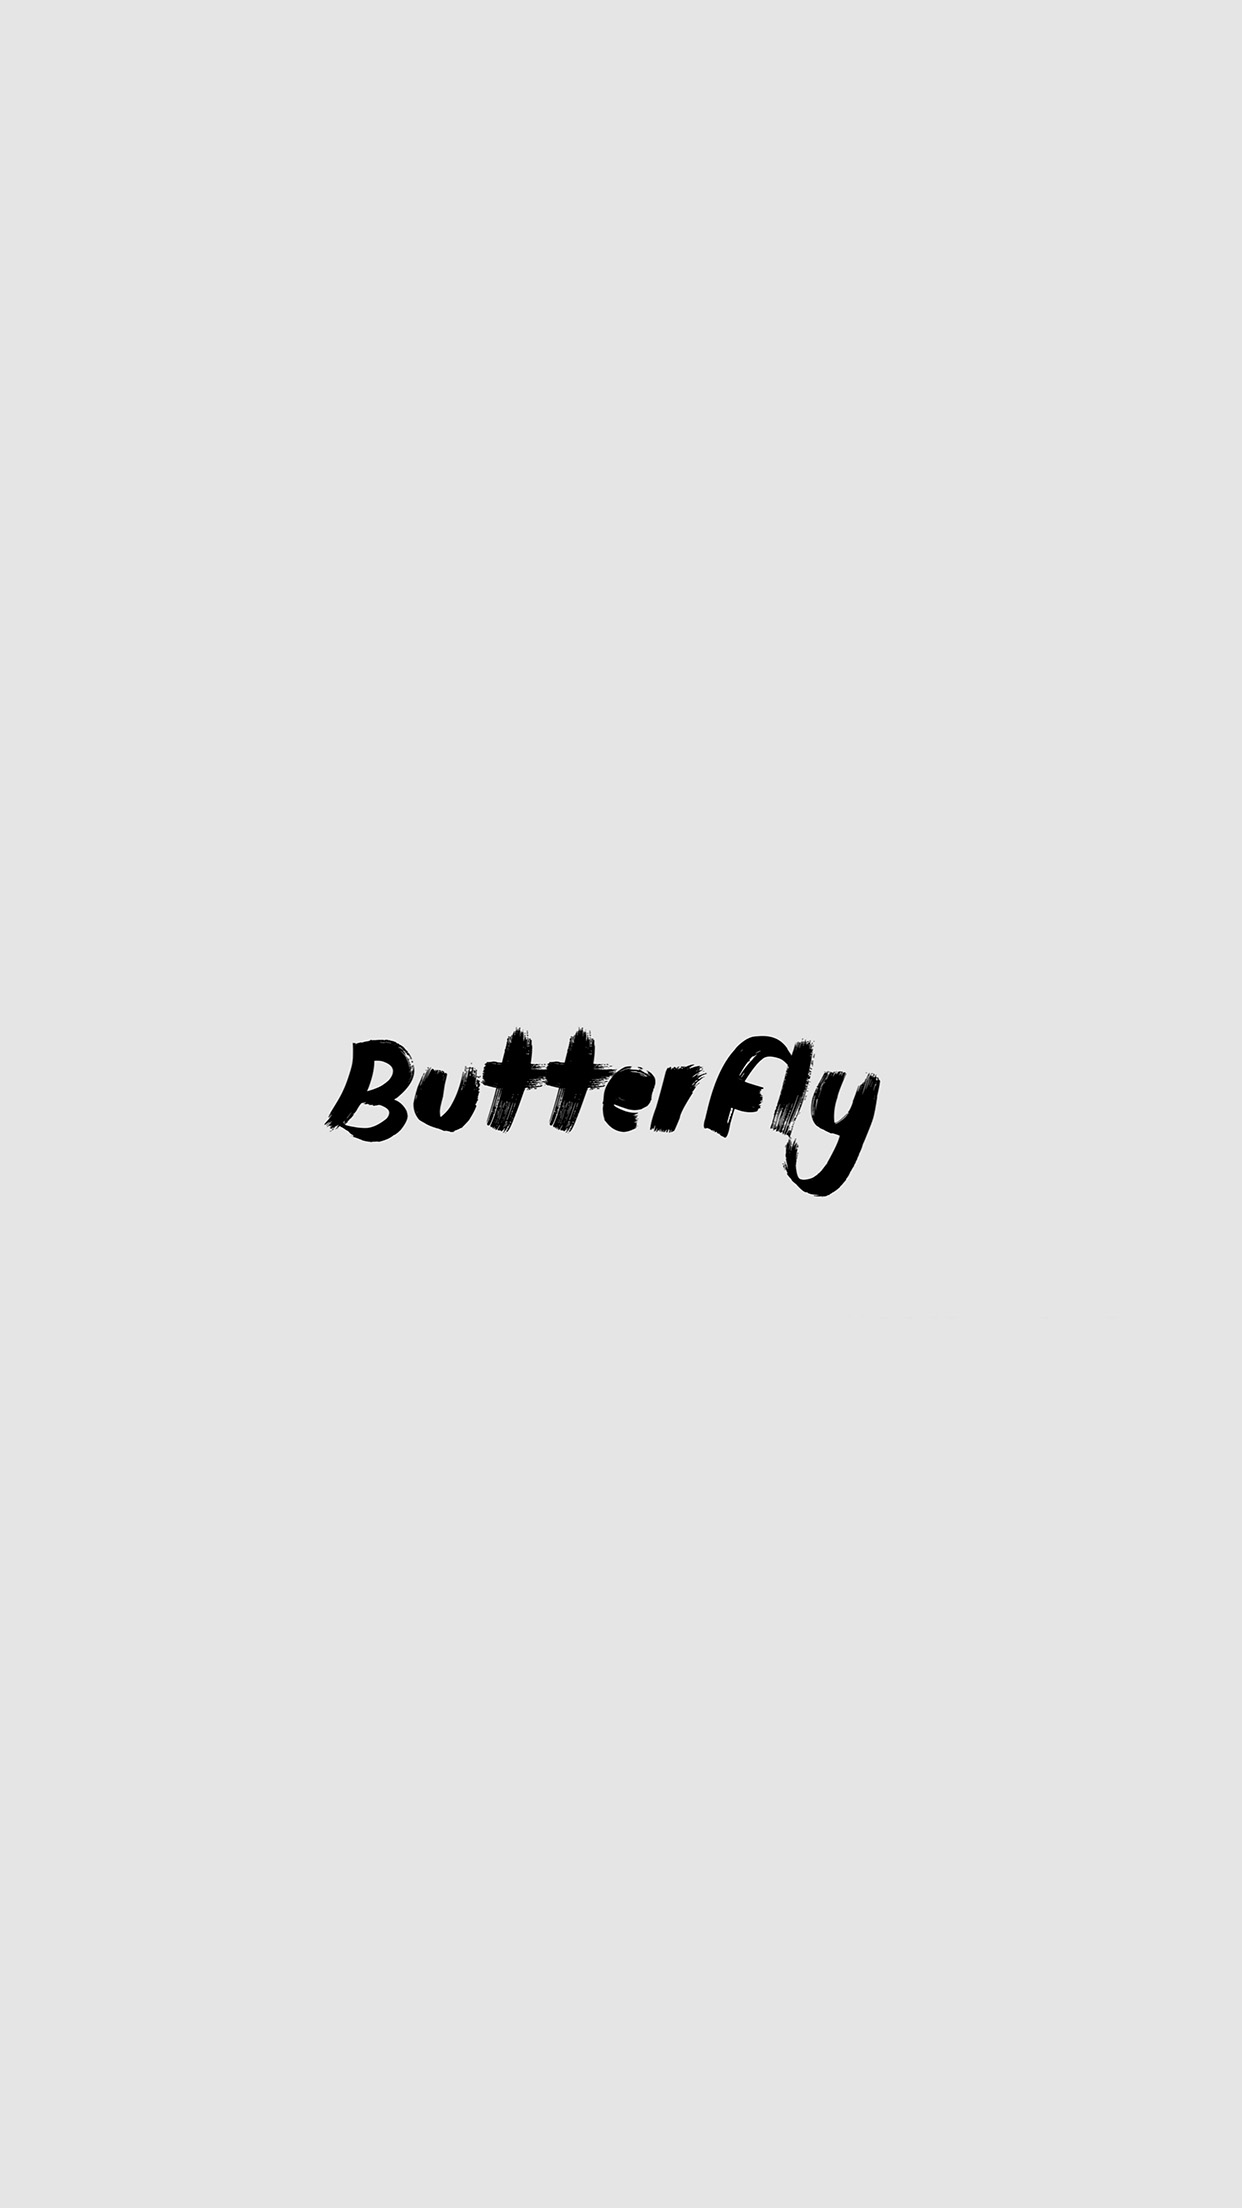 Christina Perri Logo Butterfly Music White Android wallpaper